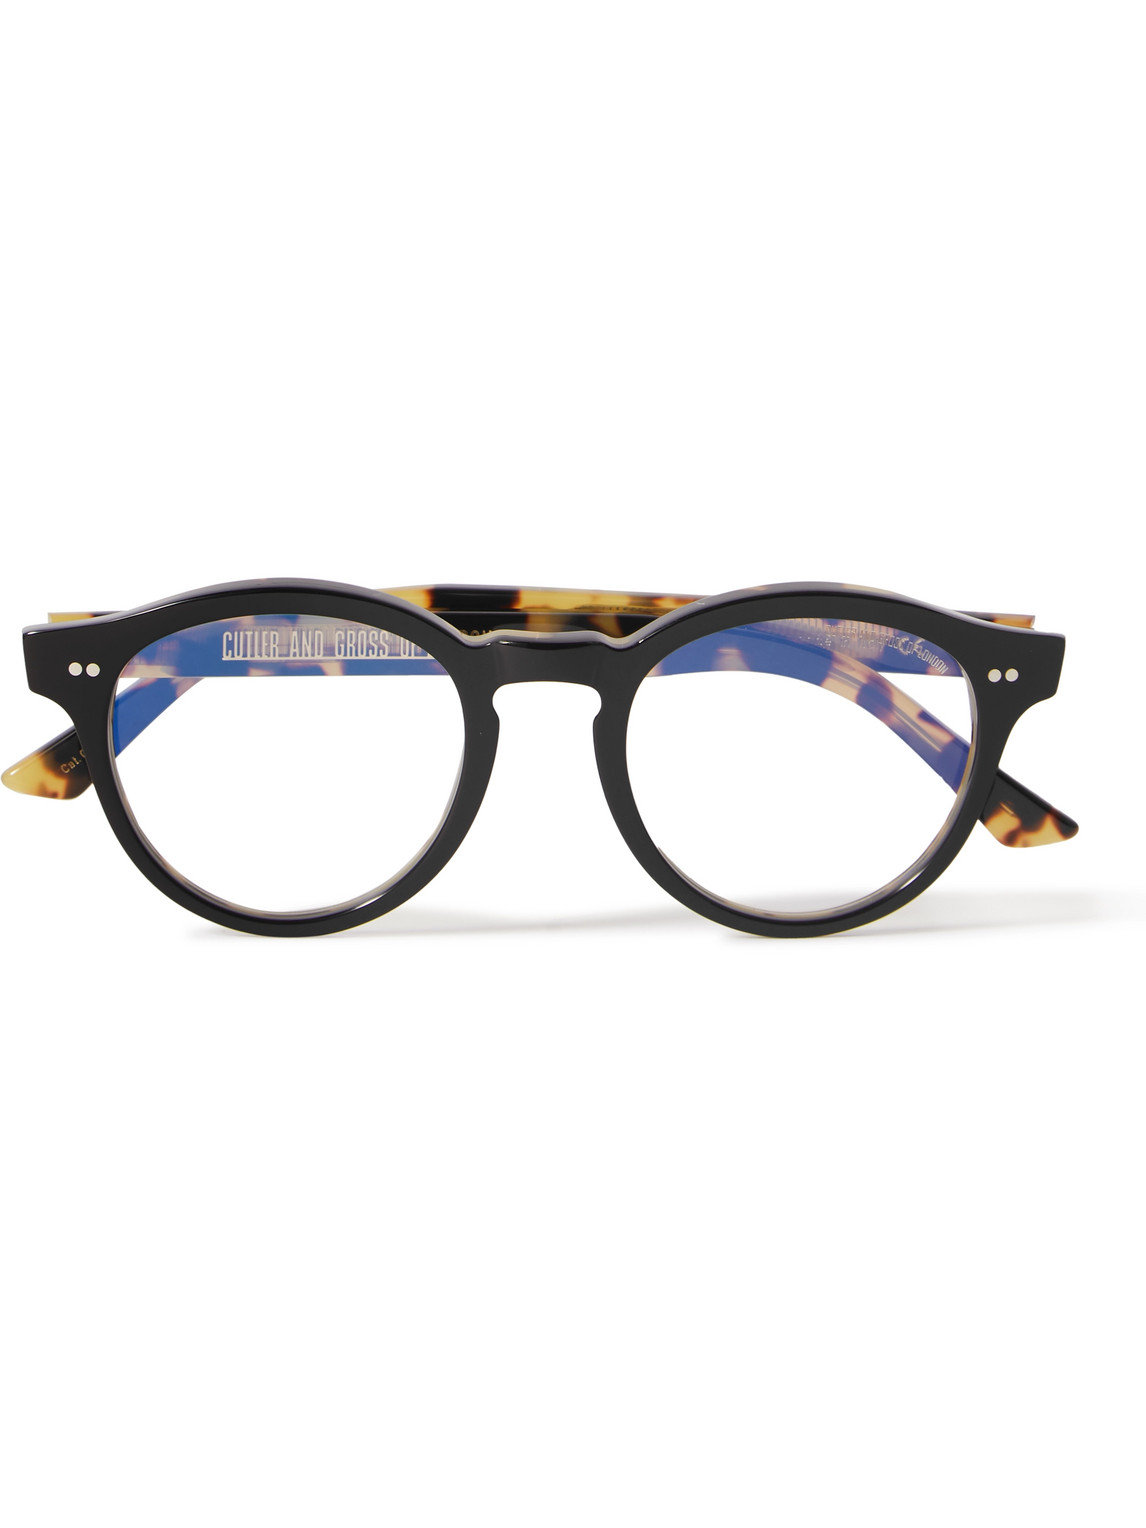 Cutler And Gross 1378 Round-frame Acetate Blue Light-blocking Optical Glasses In Black